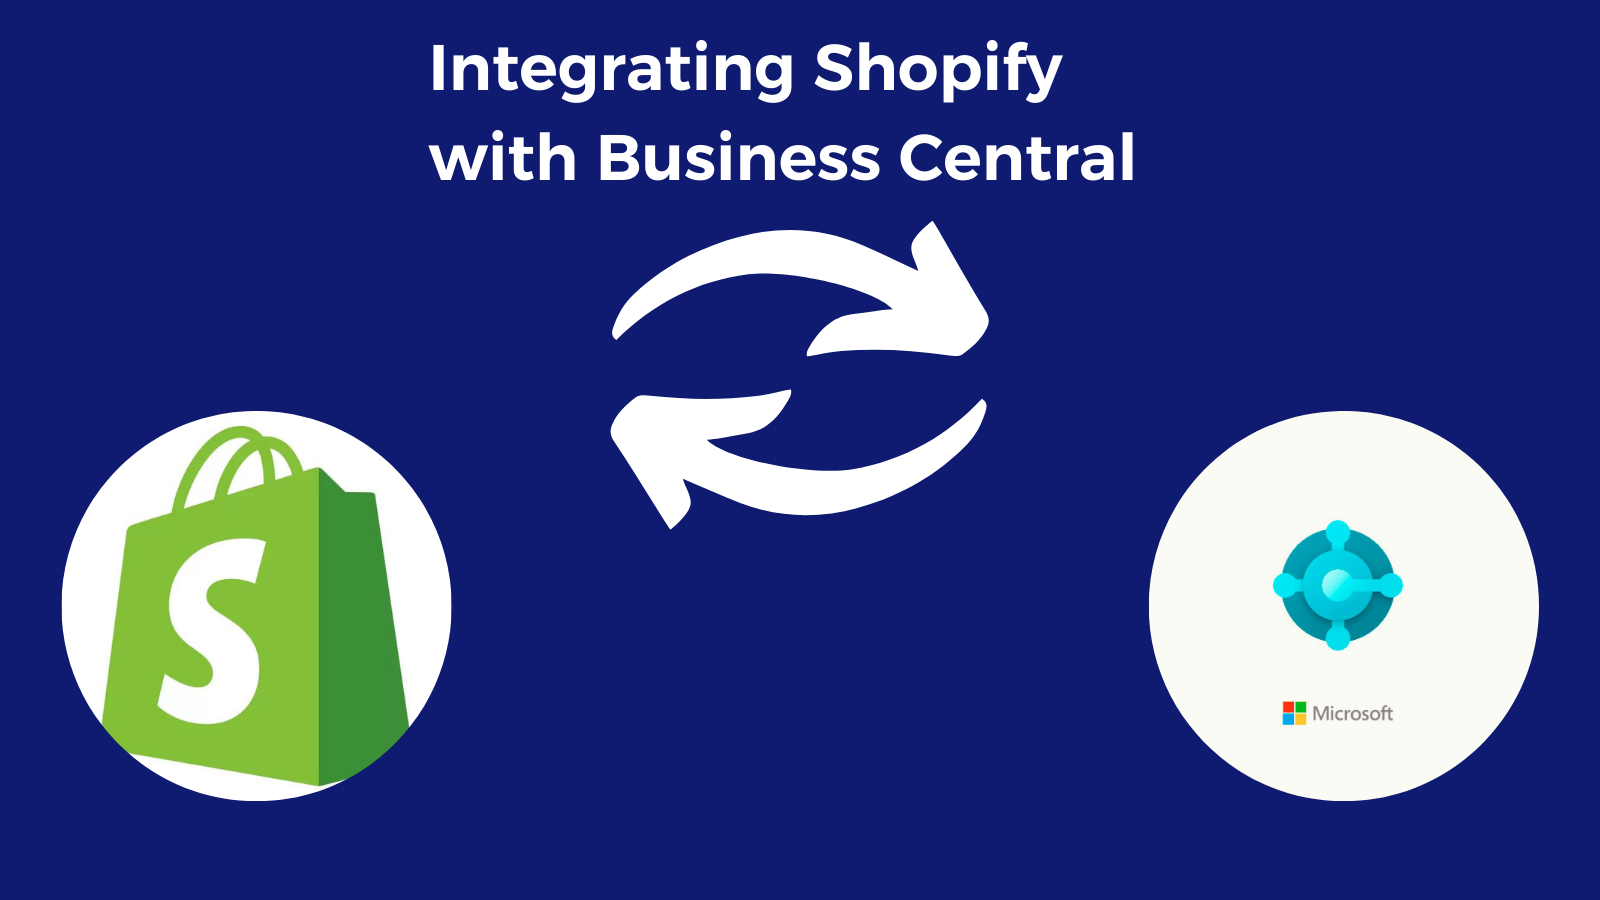 “Integrating Shopify with Business Central: Streamlining E-commerce”